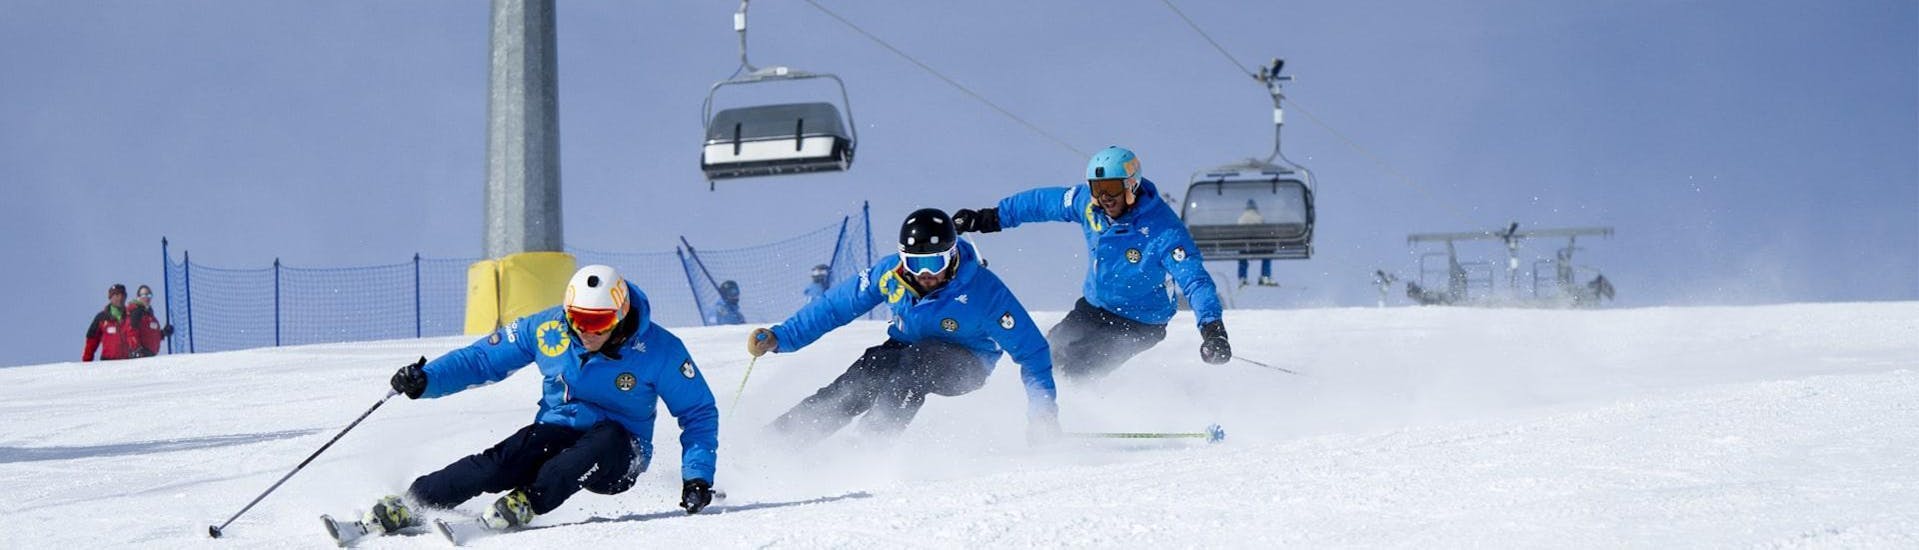 Three skiers descend the slope thanks to the techniques learned during the Private Ski Lessons for Adults - All Levels of the ski school Scuola di Sci Azzurra Livigno.